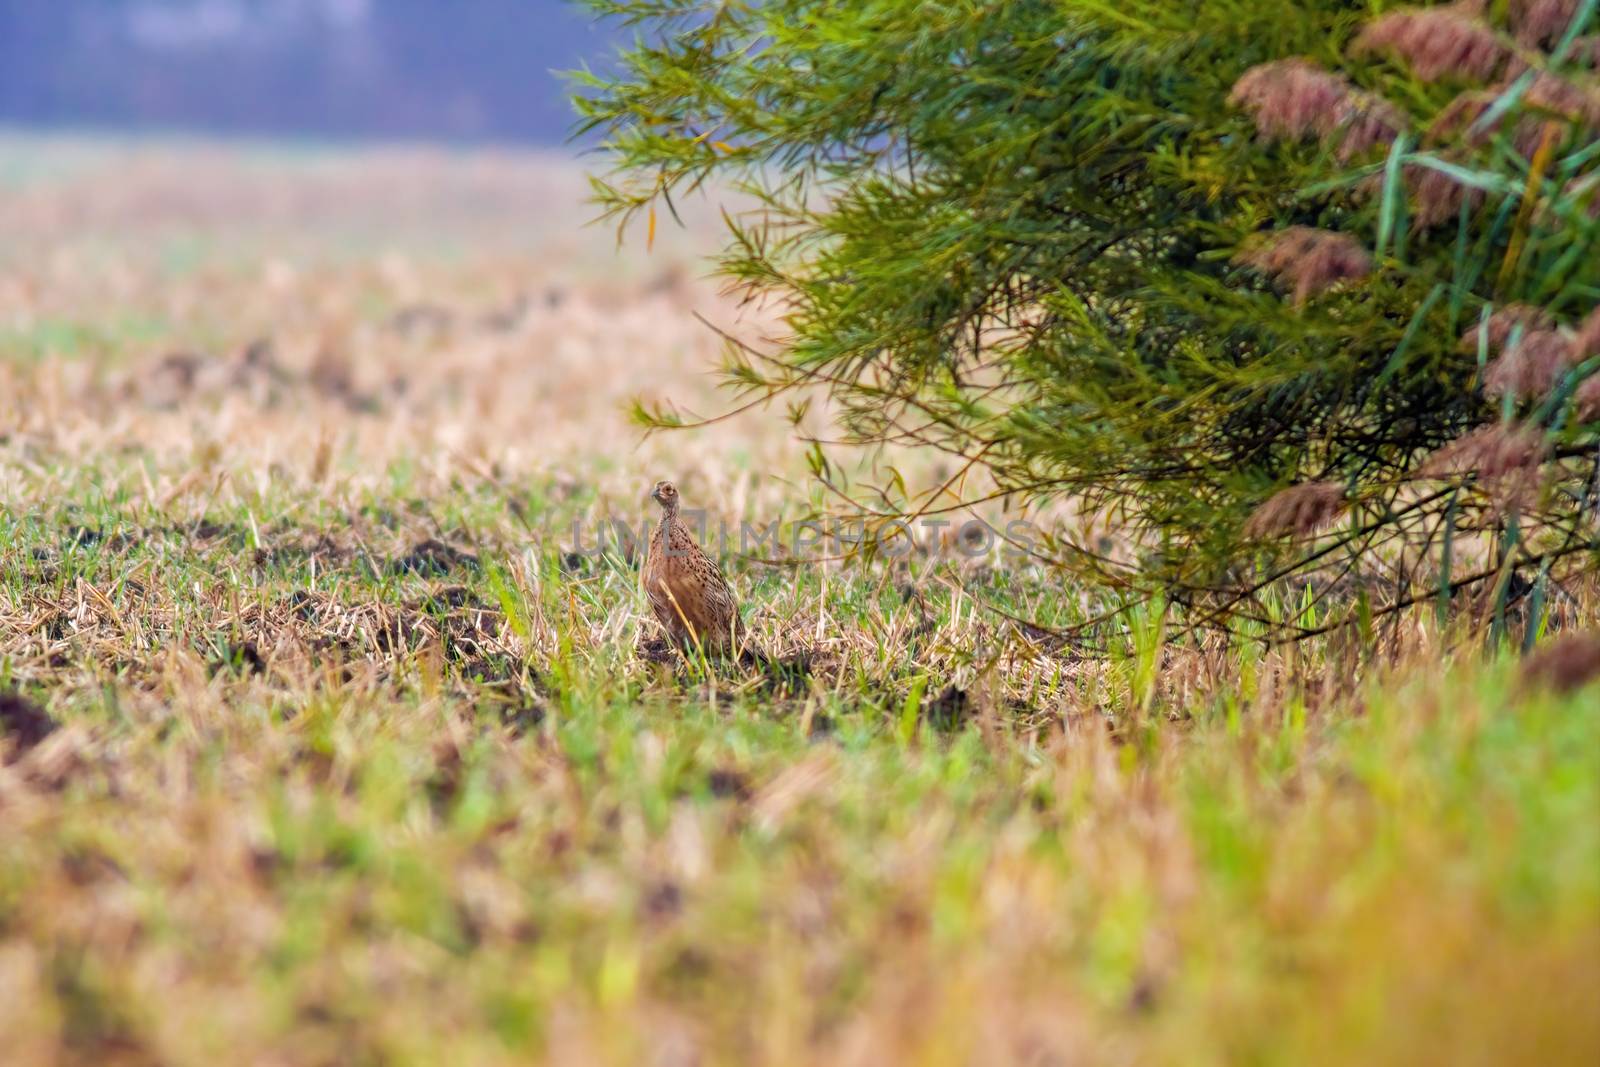 a great young bird on farm field in nature by mario_plechaty_photography